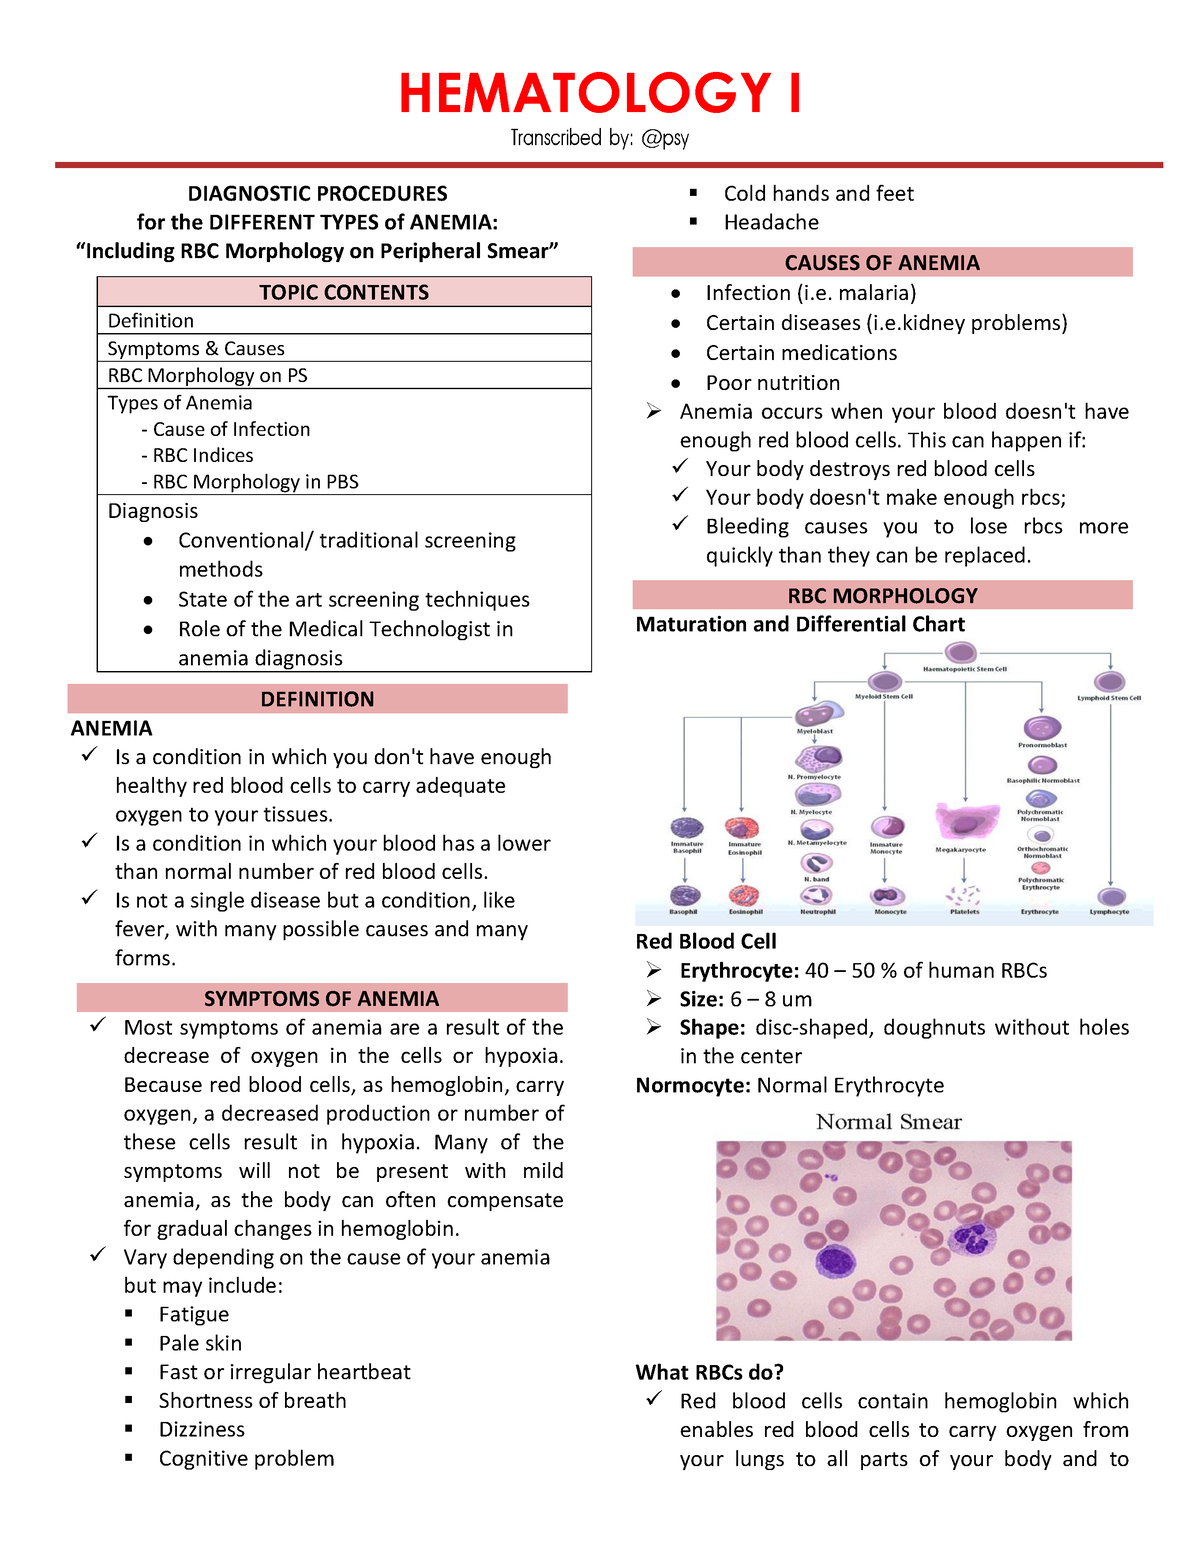 Anemia Hematology I Diagnostic Procedures For The Different Types Of Anemia 9602